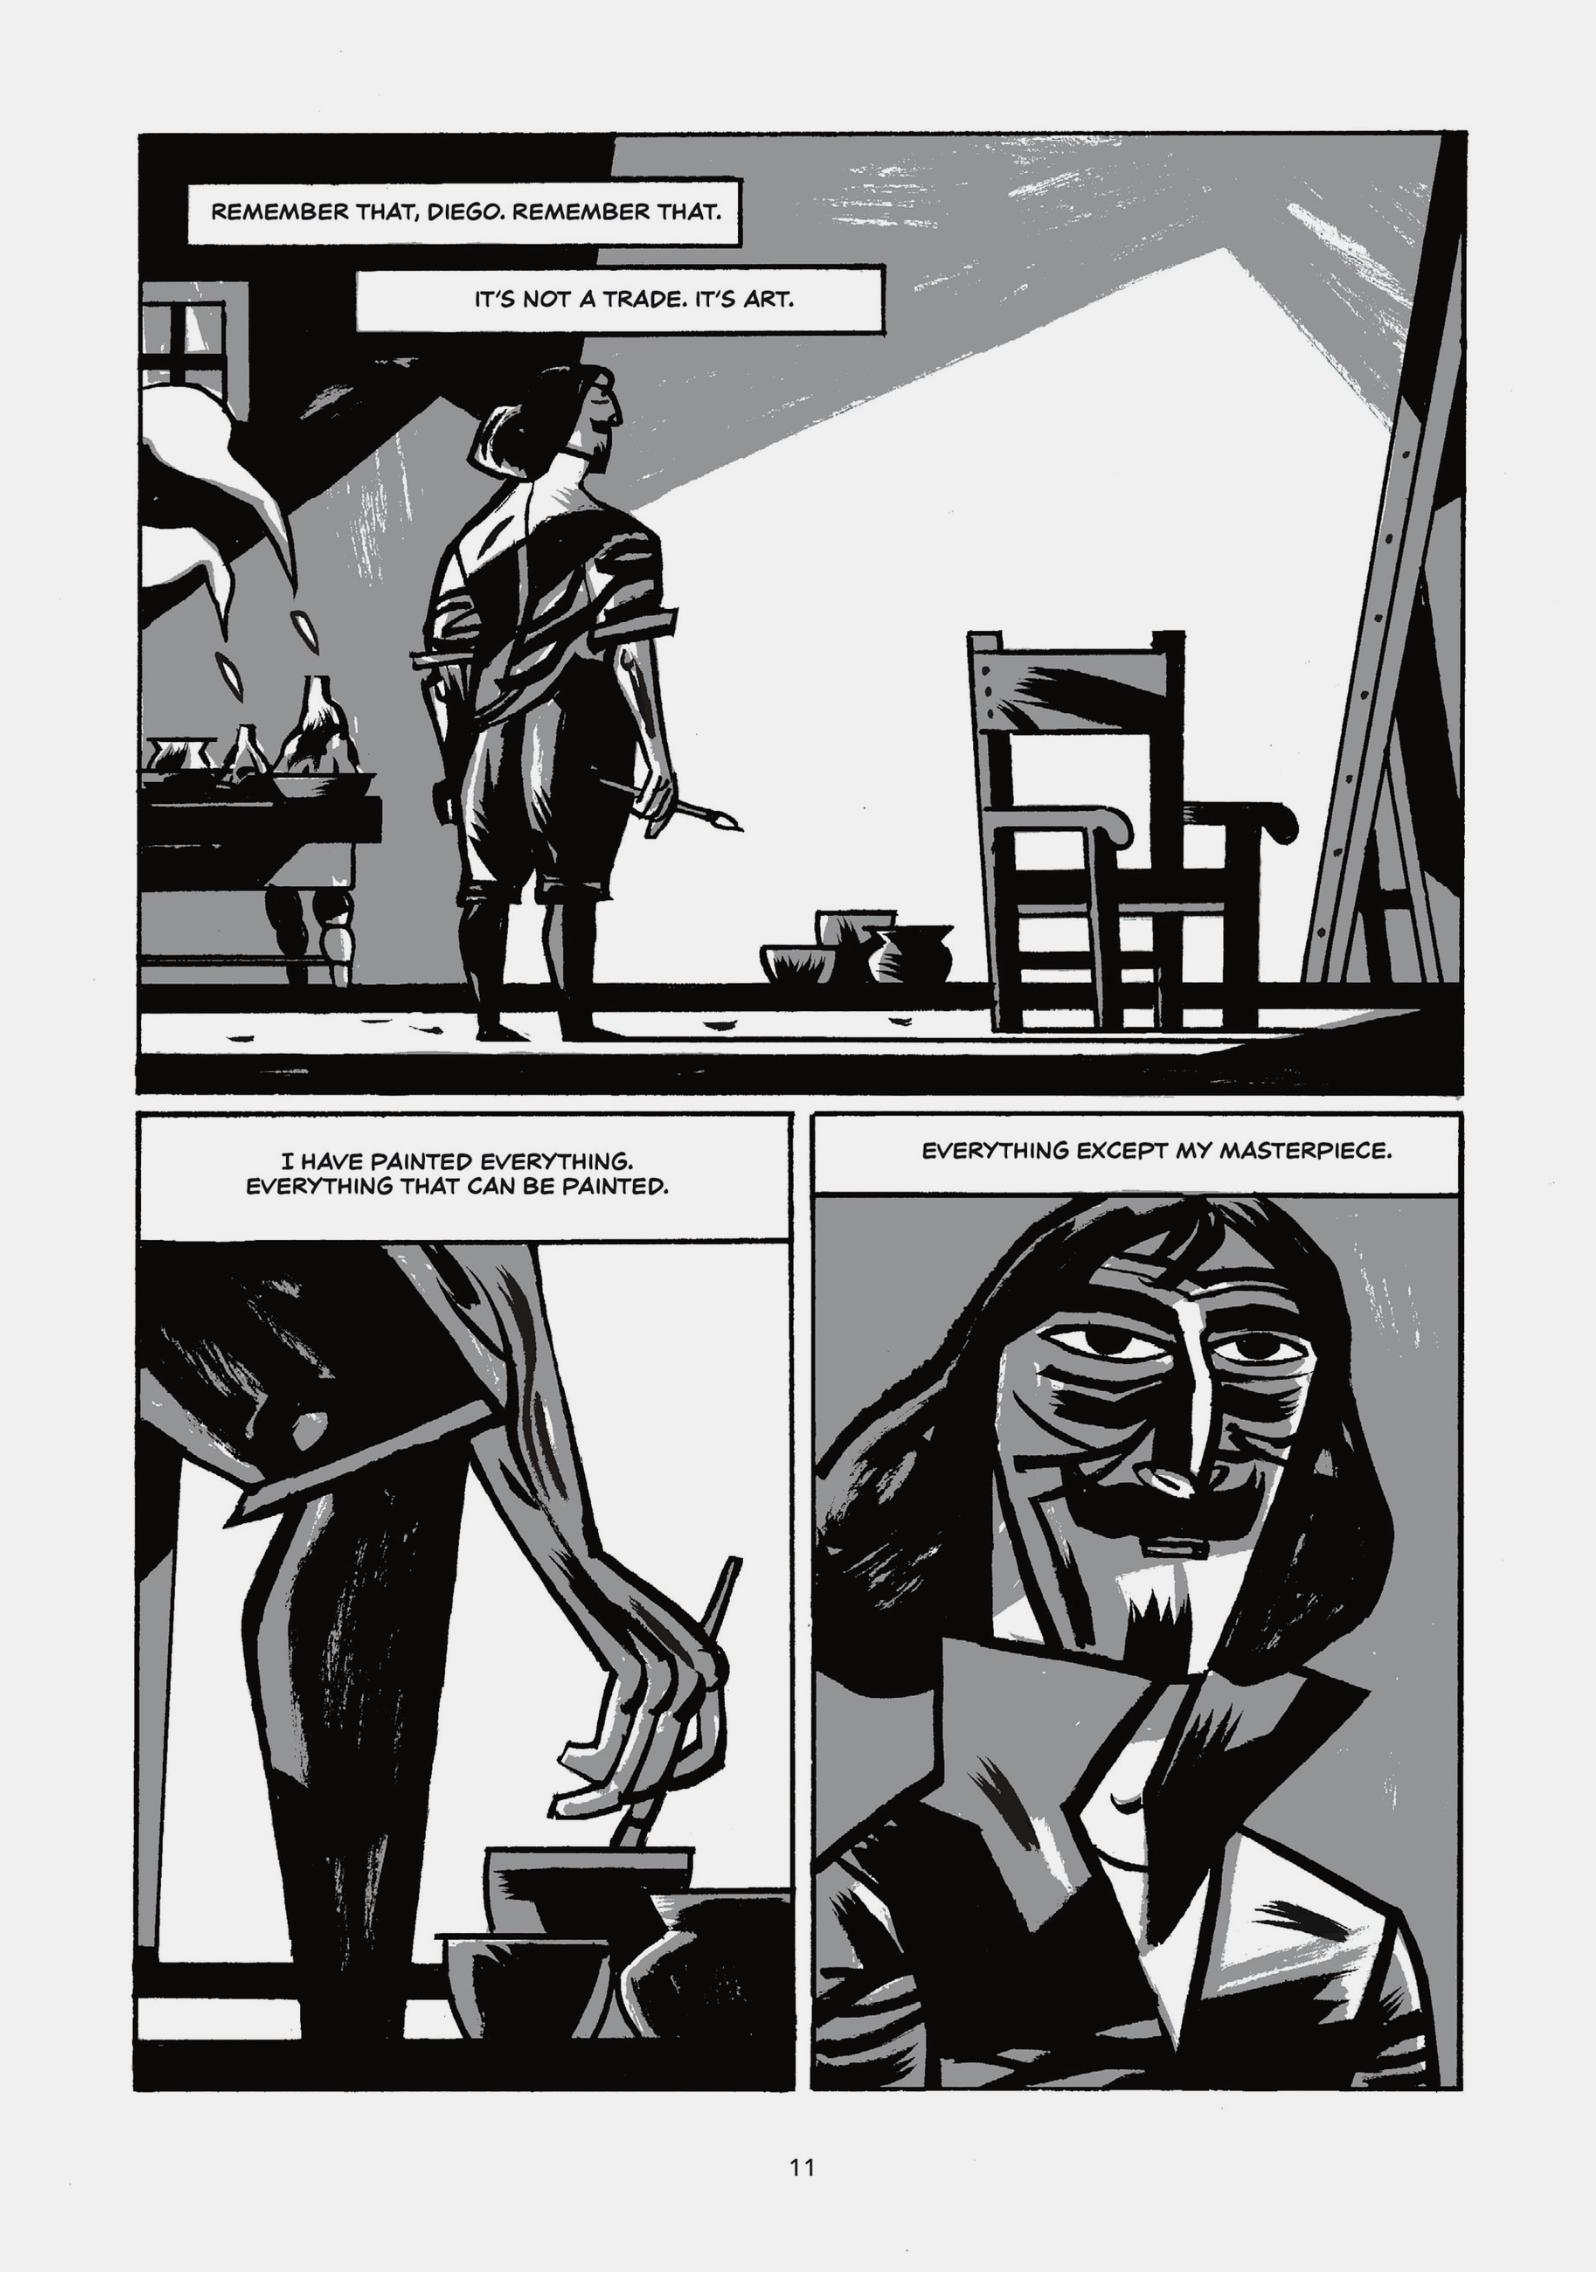 a panel from the graphic novel showing the artist talking about his art, drawn in black, white, and gray